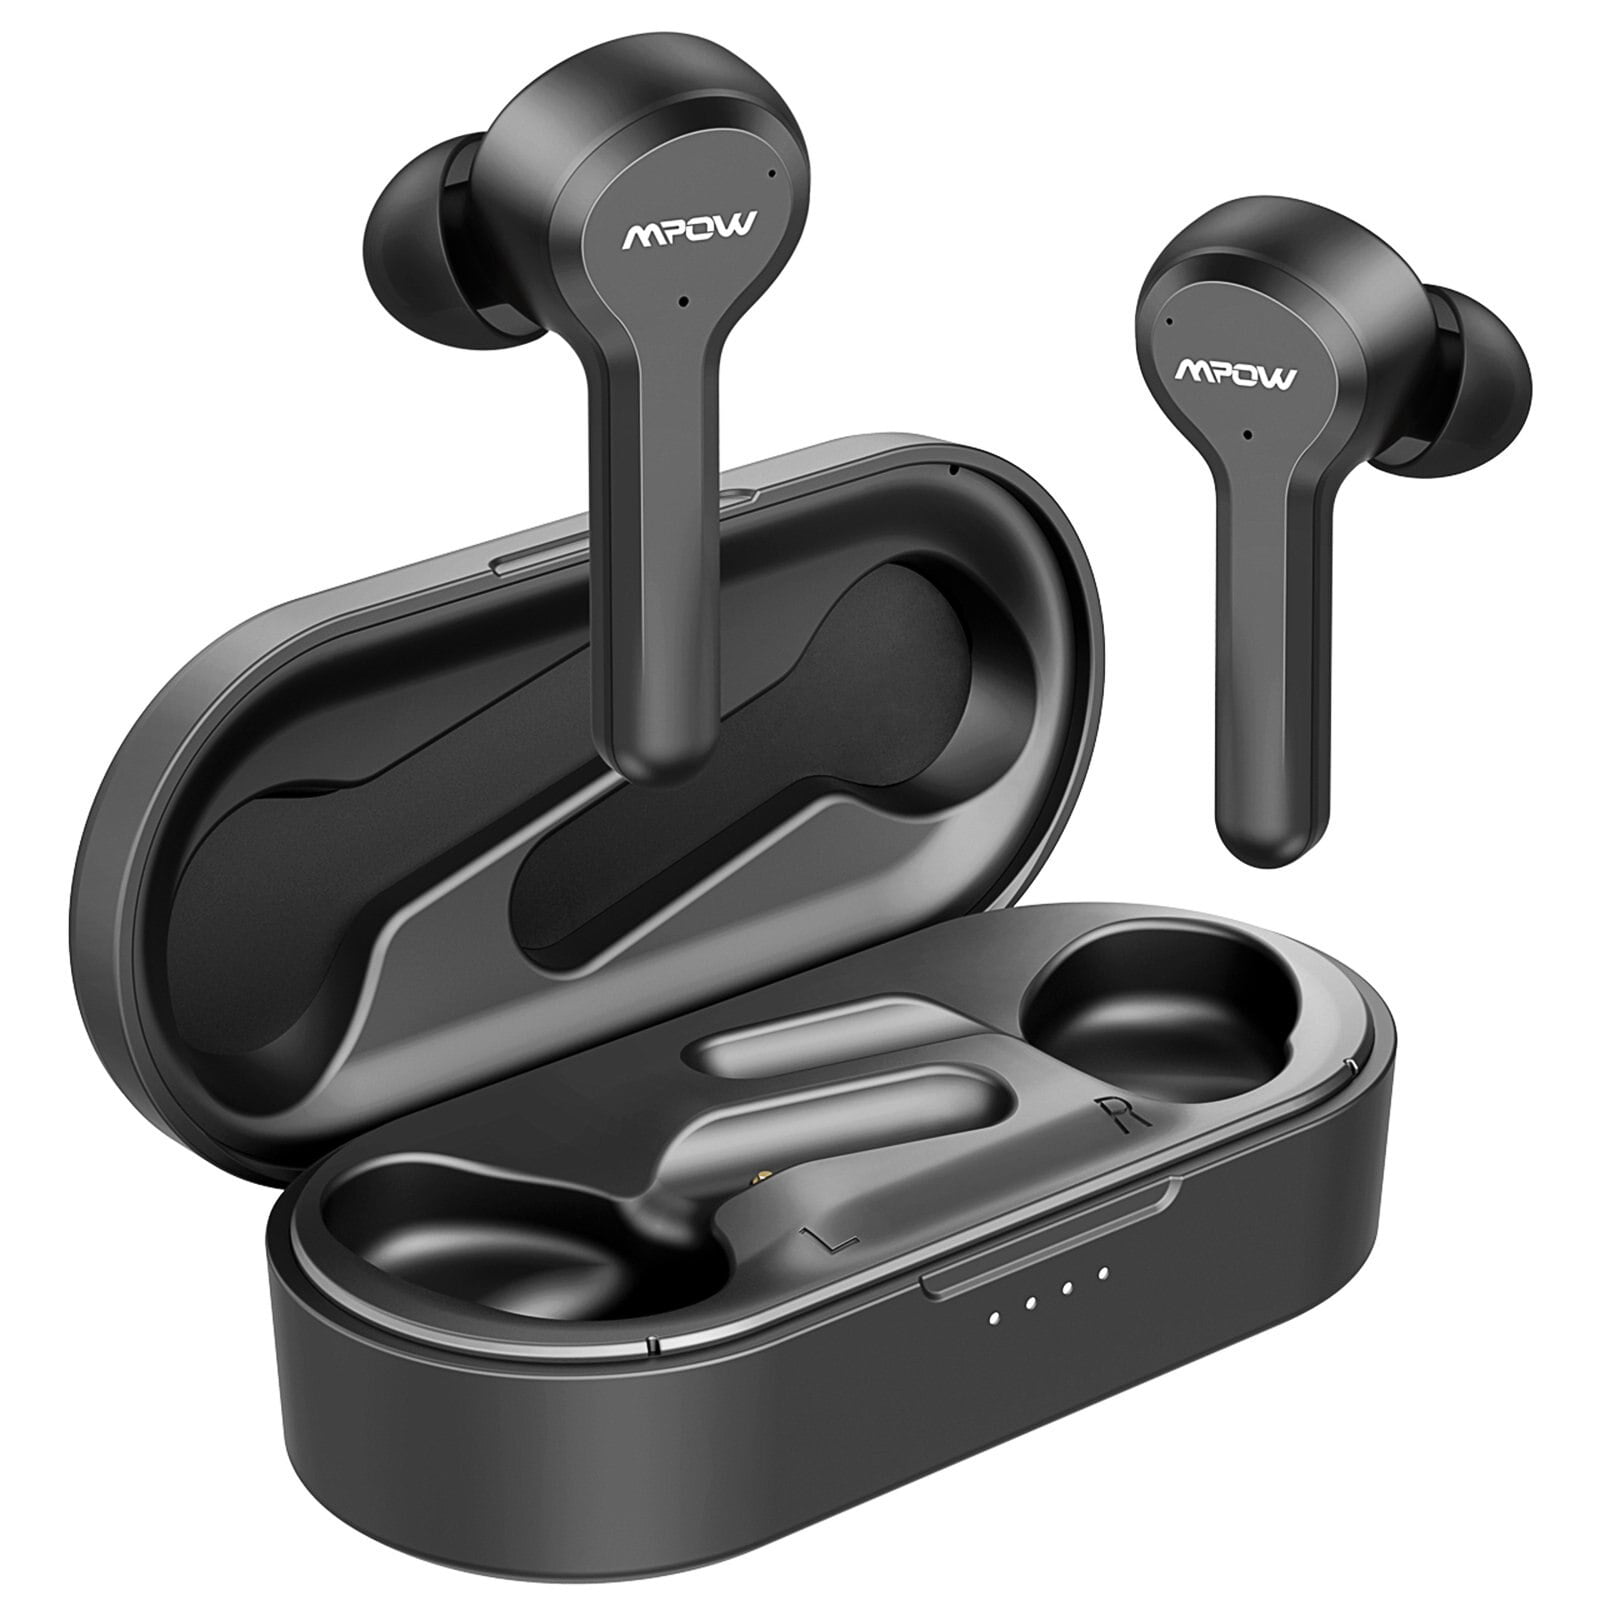 Et centralt værktøj, der spiller en vigtig rolle Post Canberra Mpow M9 Wireless Earbuds, Stereo Bass 40H Playtime Bluetooth 5.0 Earbuds  with Touch Control, 4 Built-in Mic, Noise Cancellation, IPX8 Waterproof  Sports Headphones Wireless Earphones for Home Office - Walmart.com